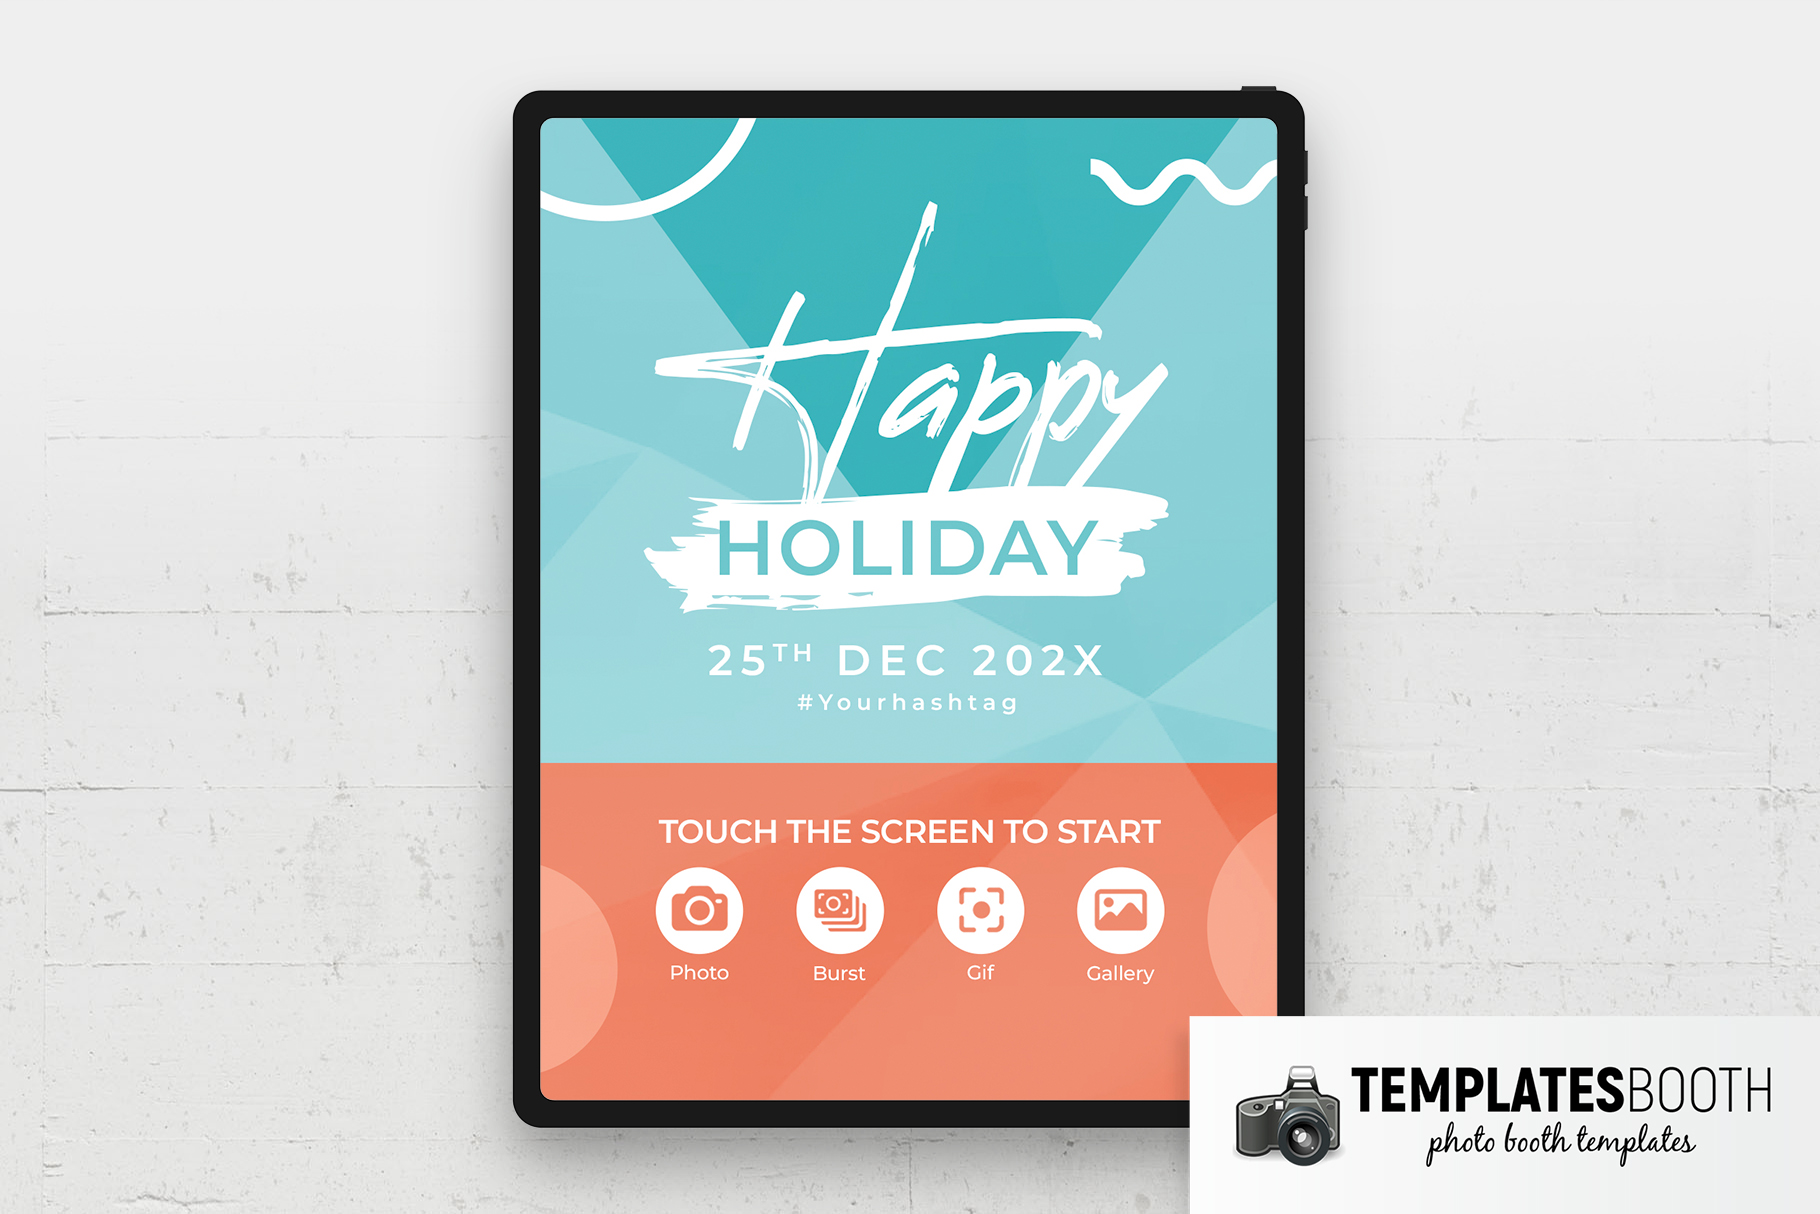 Happy Holiday Photo Booth Welcome Screen